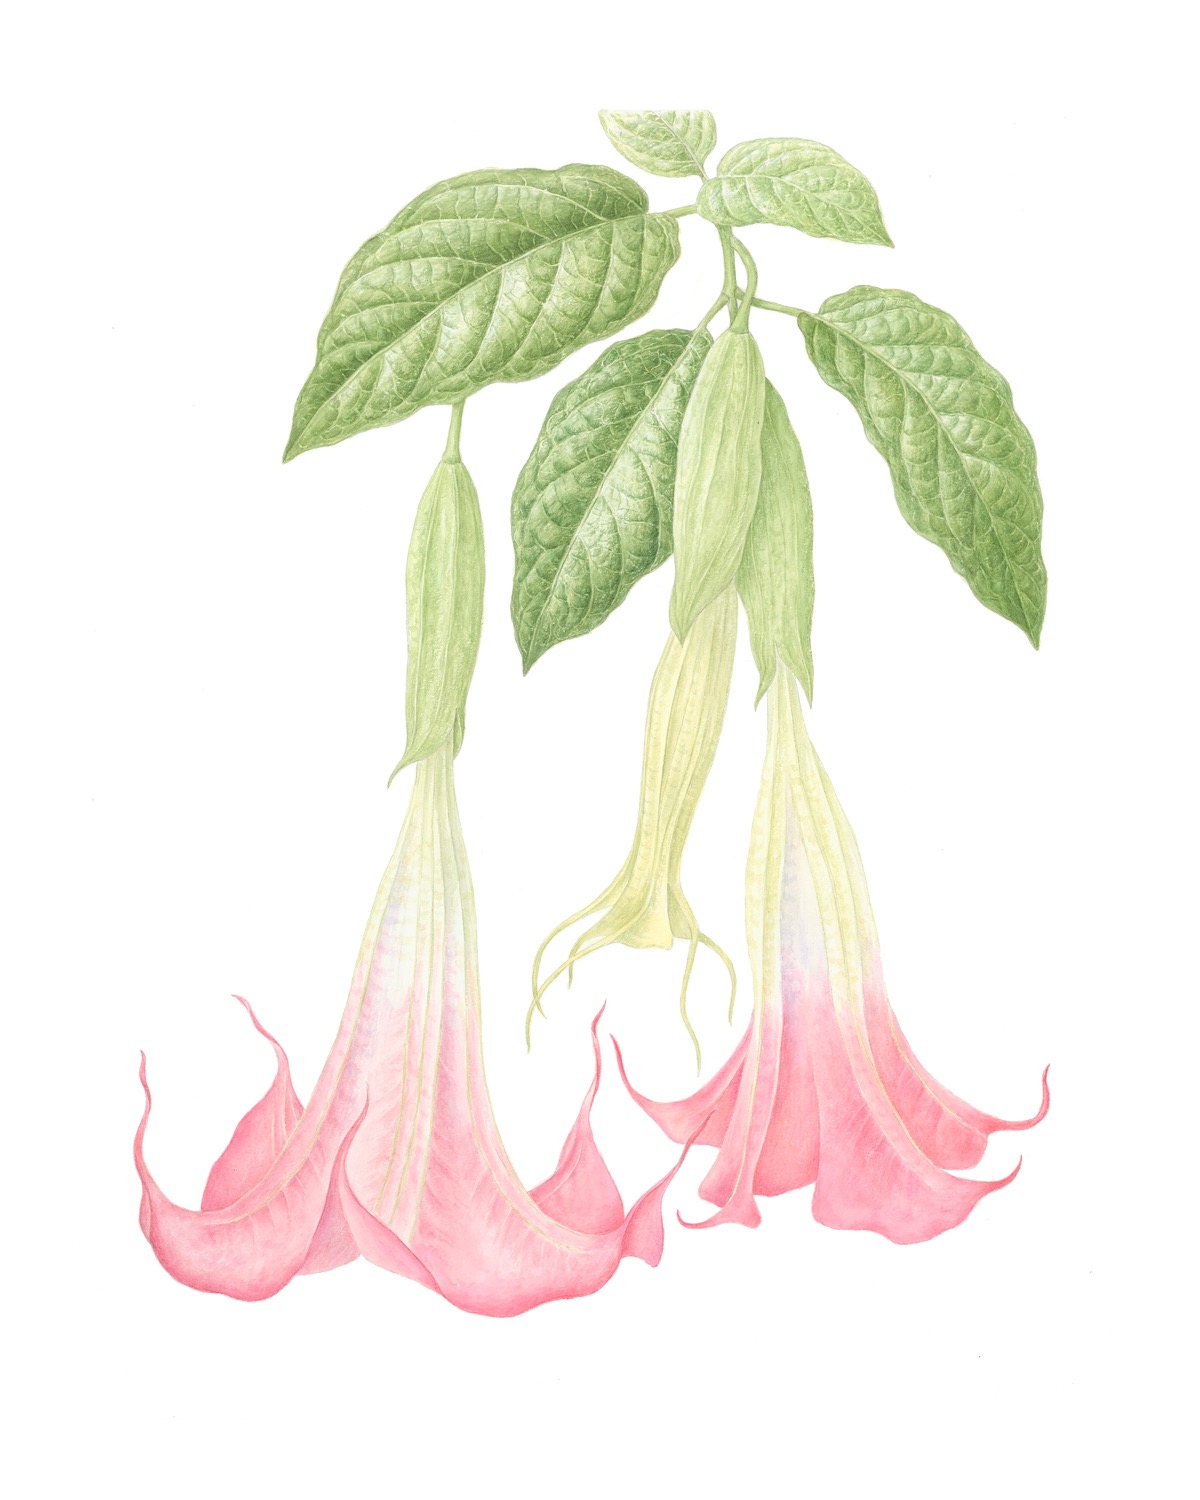 Brugmansia x candida watercolour illustration by Catherine Watters.